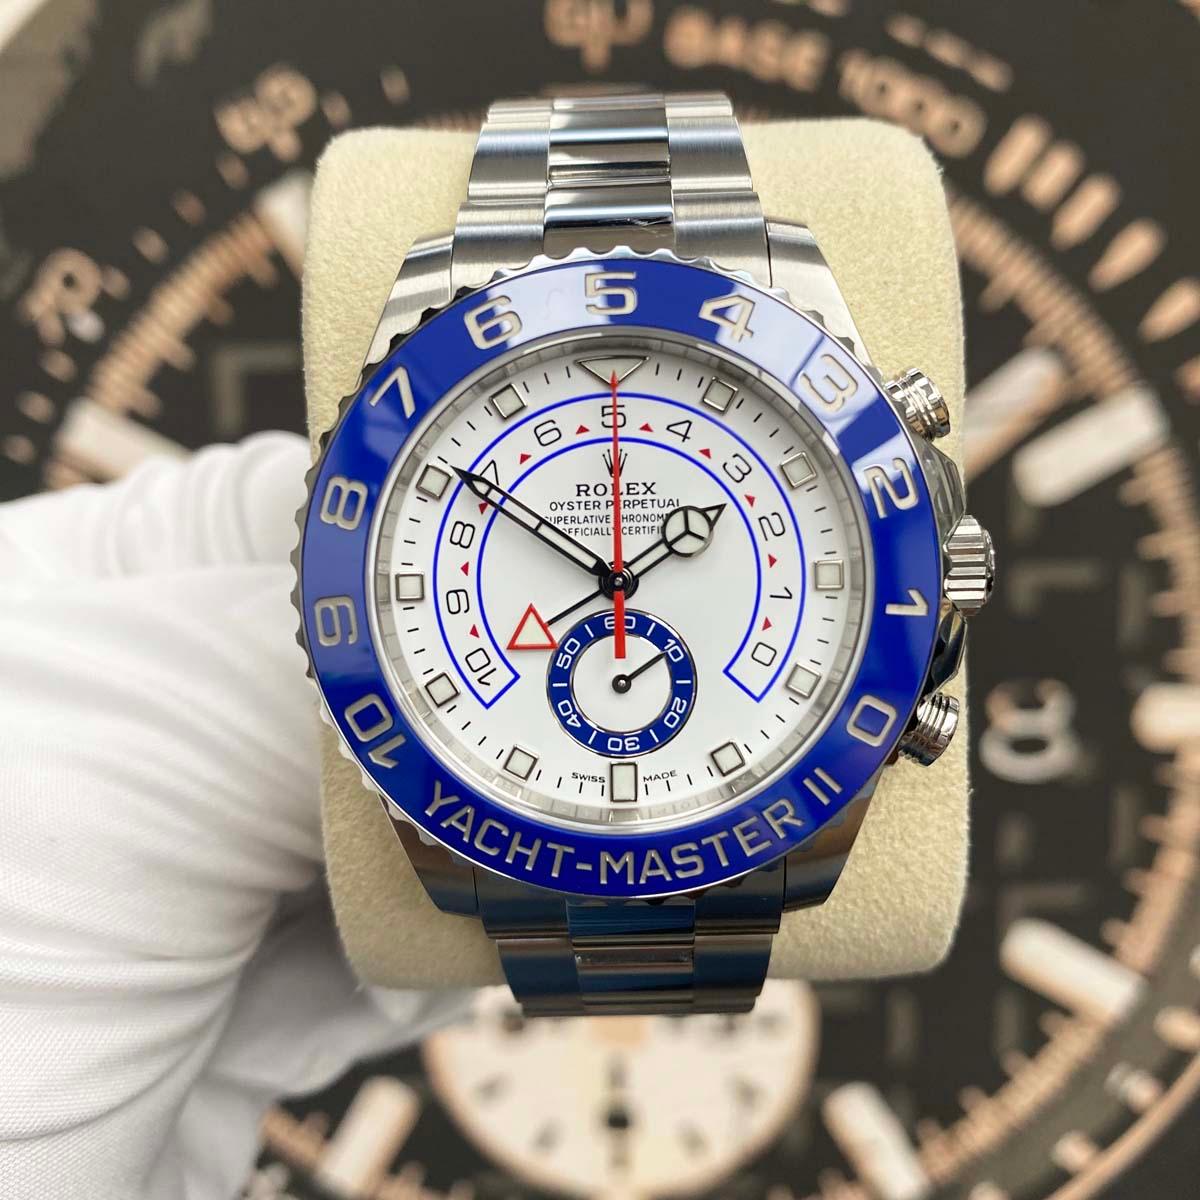 Rolex Yacht-Master II Newer Style Mercedes Hands 44mm 116680 White Dial Pre-Owned - Gotham Trading 